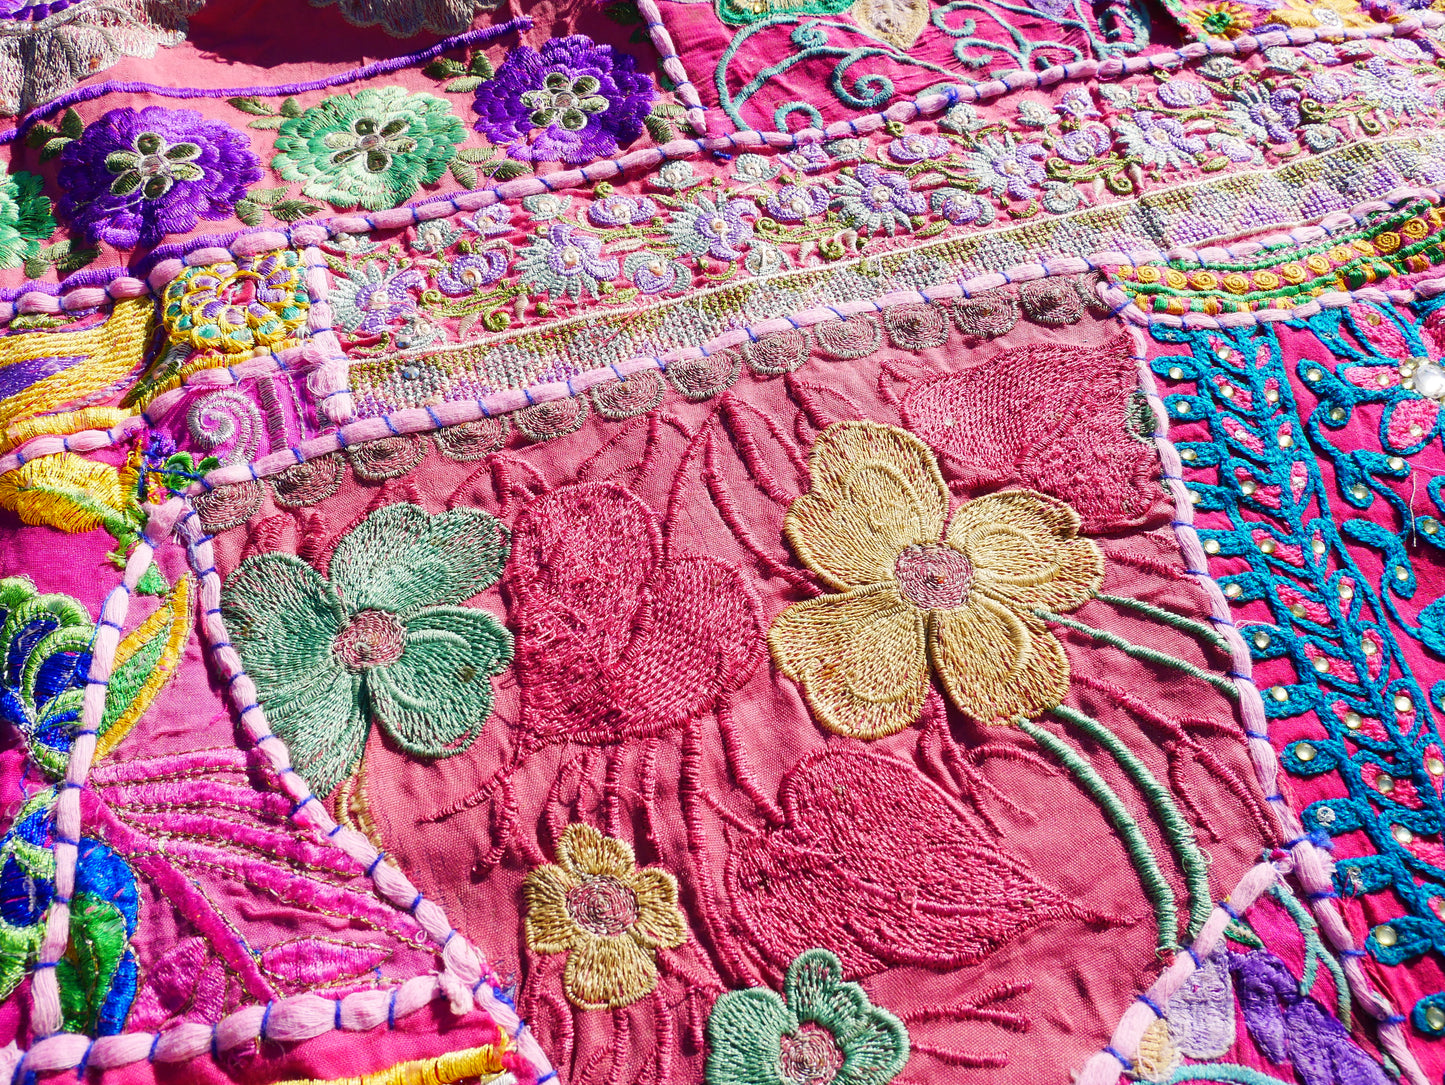 Indian bedding "Hippie Spring" bed throw - patchwork quilt - colorful handmade bedspread